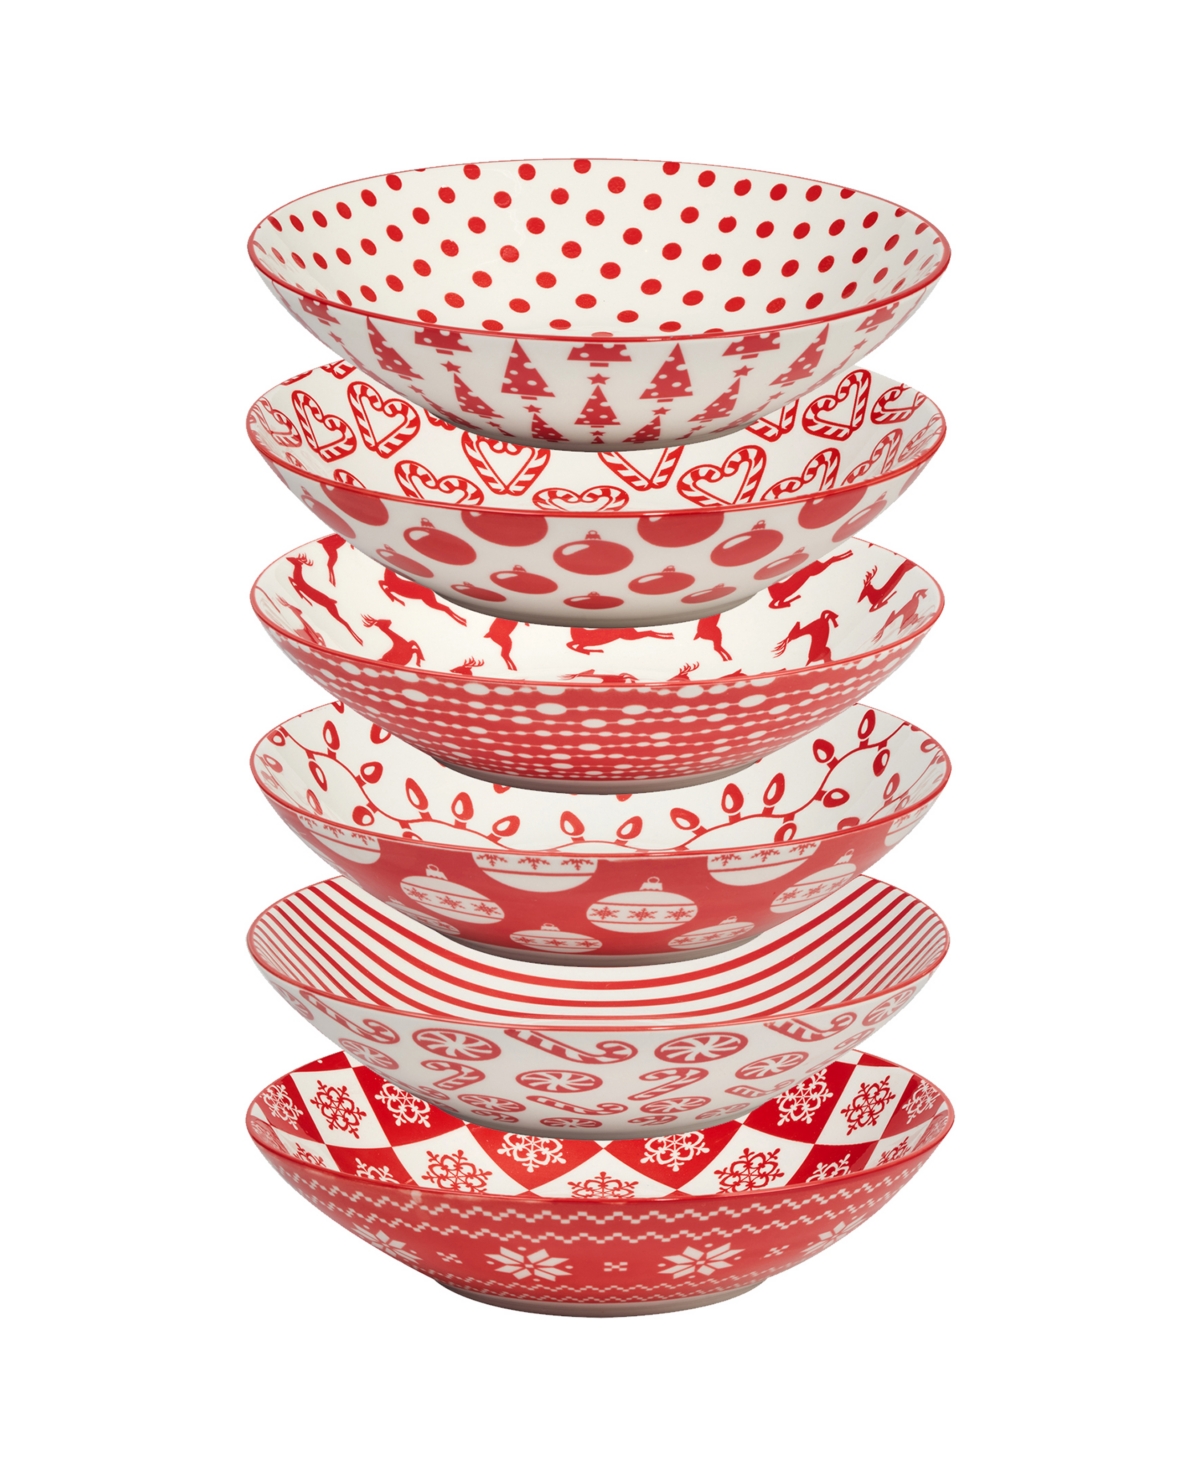 Peppermint Candy 40 oz Soup Bowls Set of 6, Service for 6 - Red